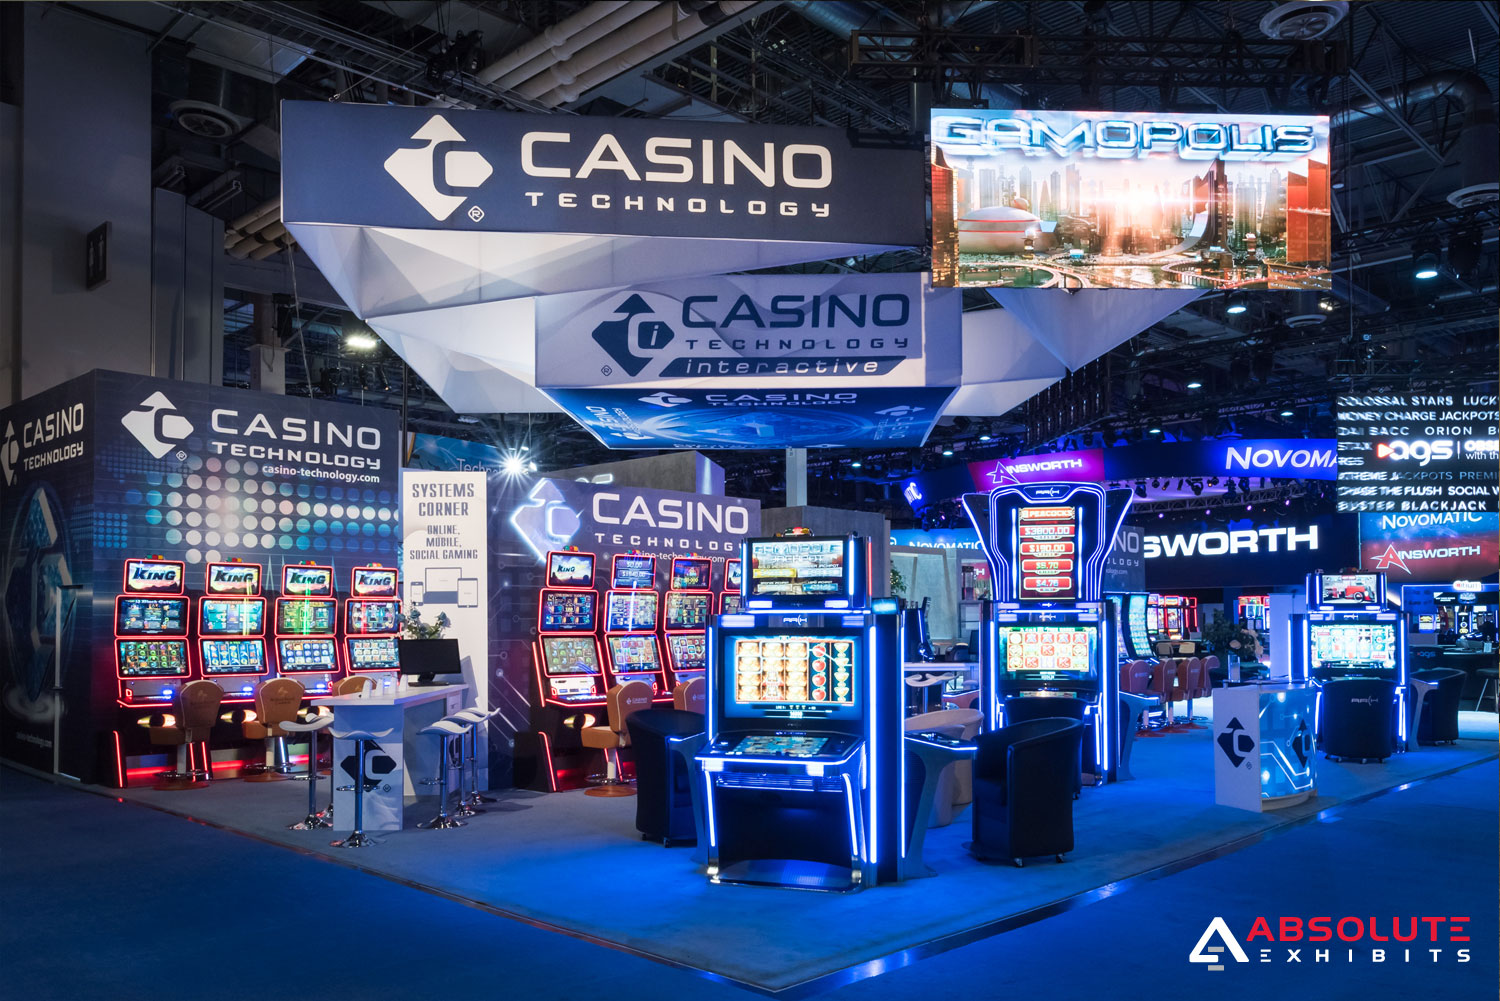 Information about Global Gaming Expo (G2E) held in Las Vegas, Nevada on October G2E is the world's largest and premier gaming event where gaming executives, buyers, and industry professionals meet each fall in Las Vegas to conduct serious business.